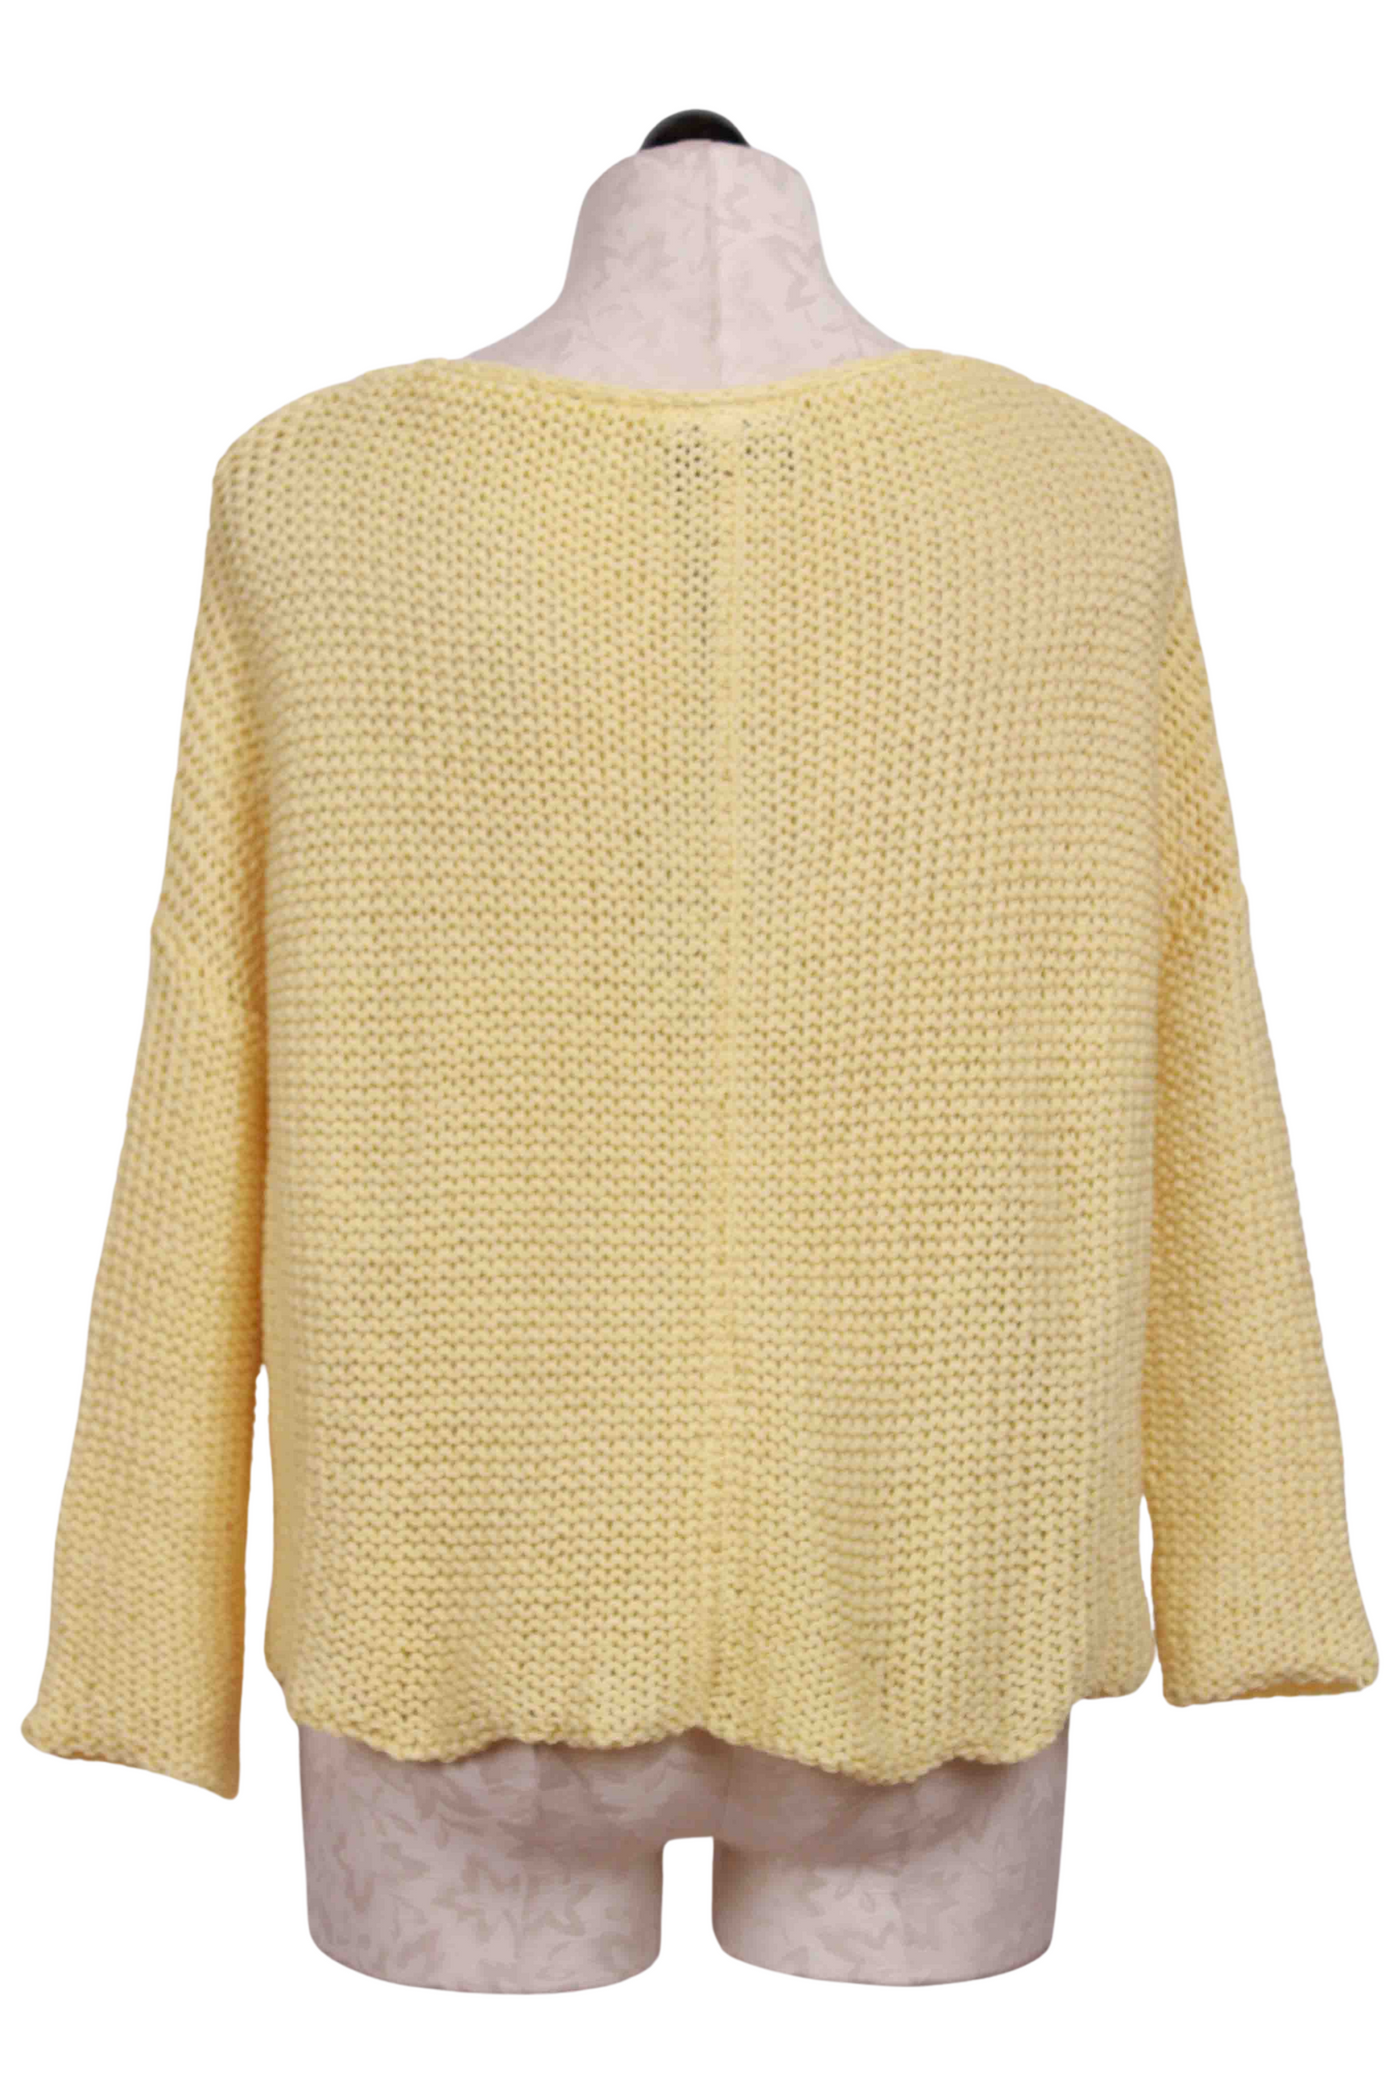 back view of Crocus Yellow Key West Crew Cotton Sweater by Wooden Ships